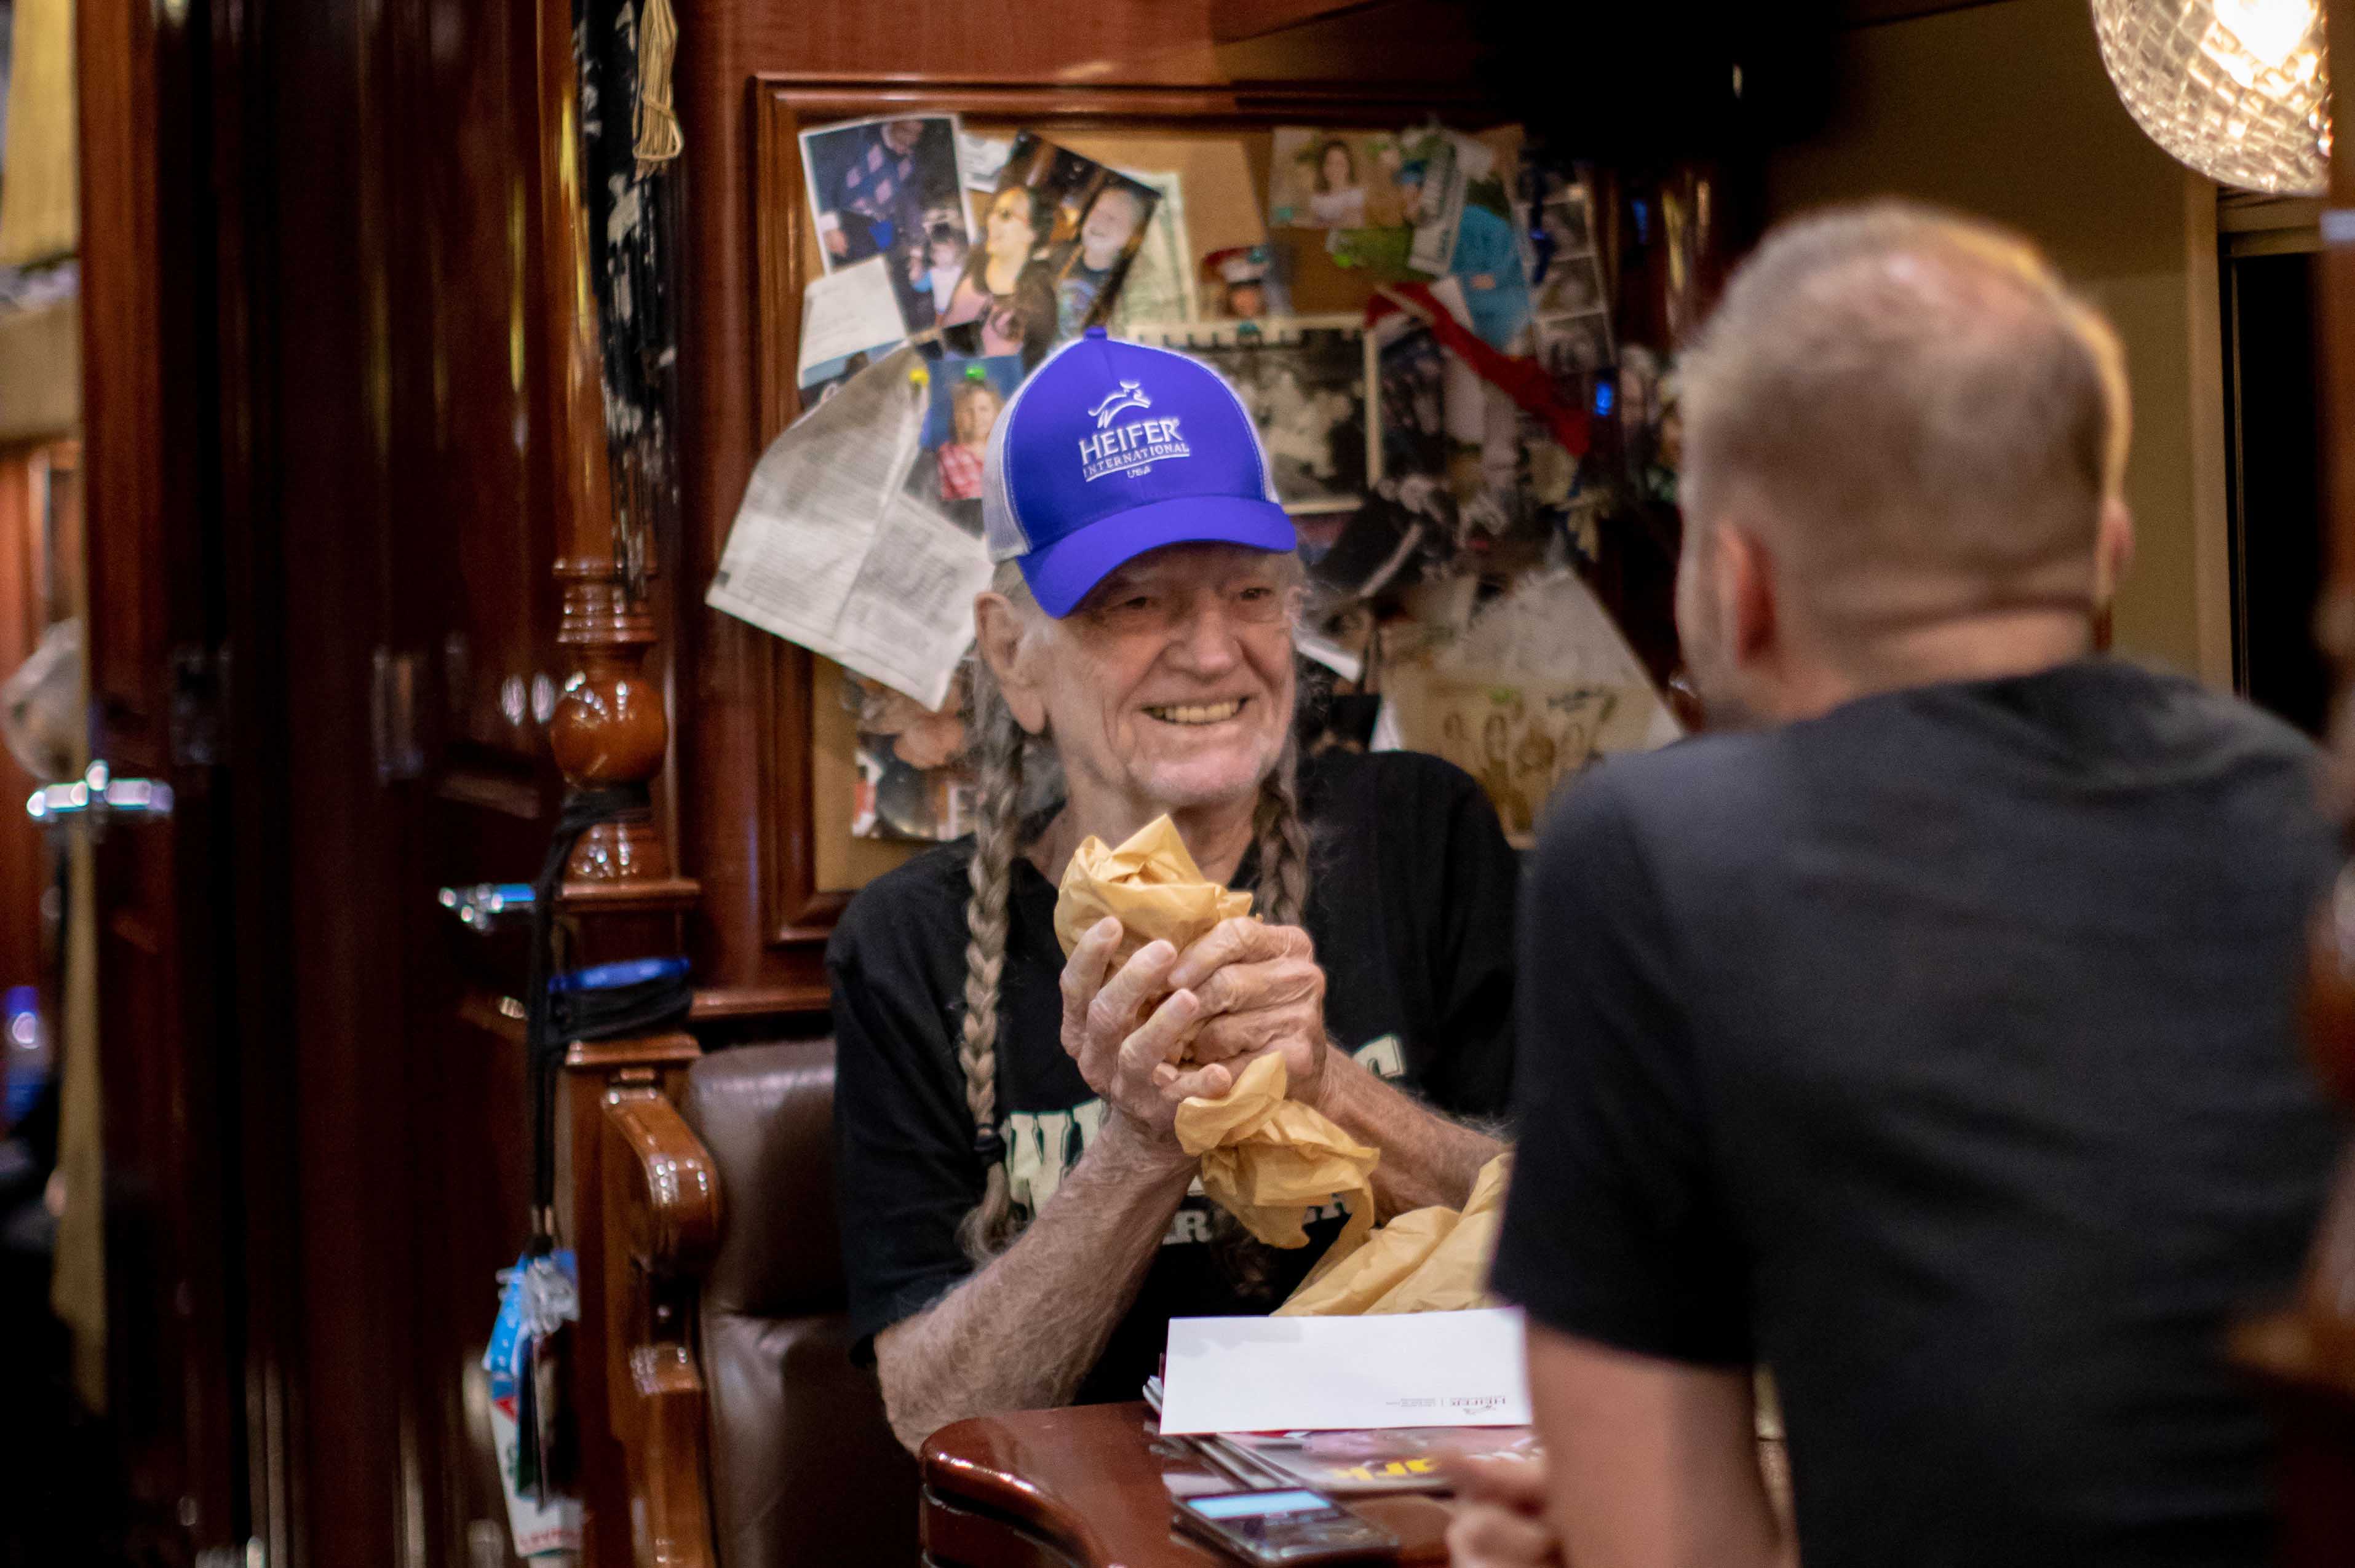 Writer and editor extraordinaire Jason Woods interviews Willie Nelson in August 2018 